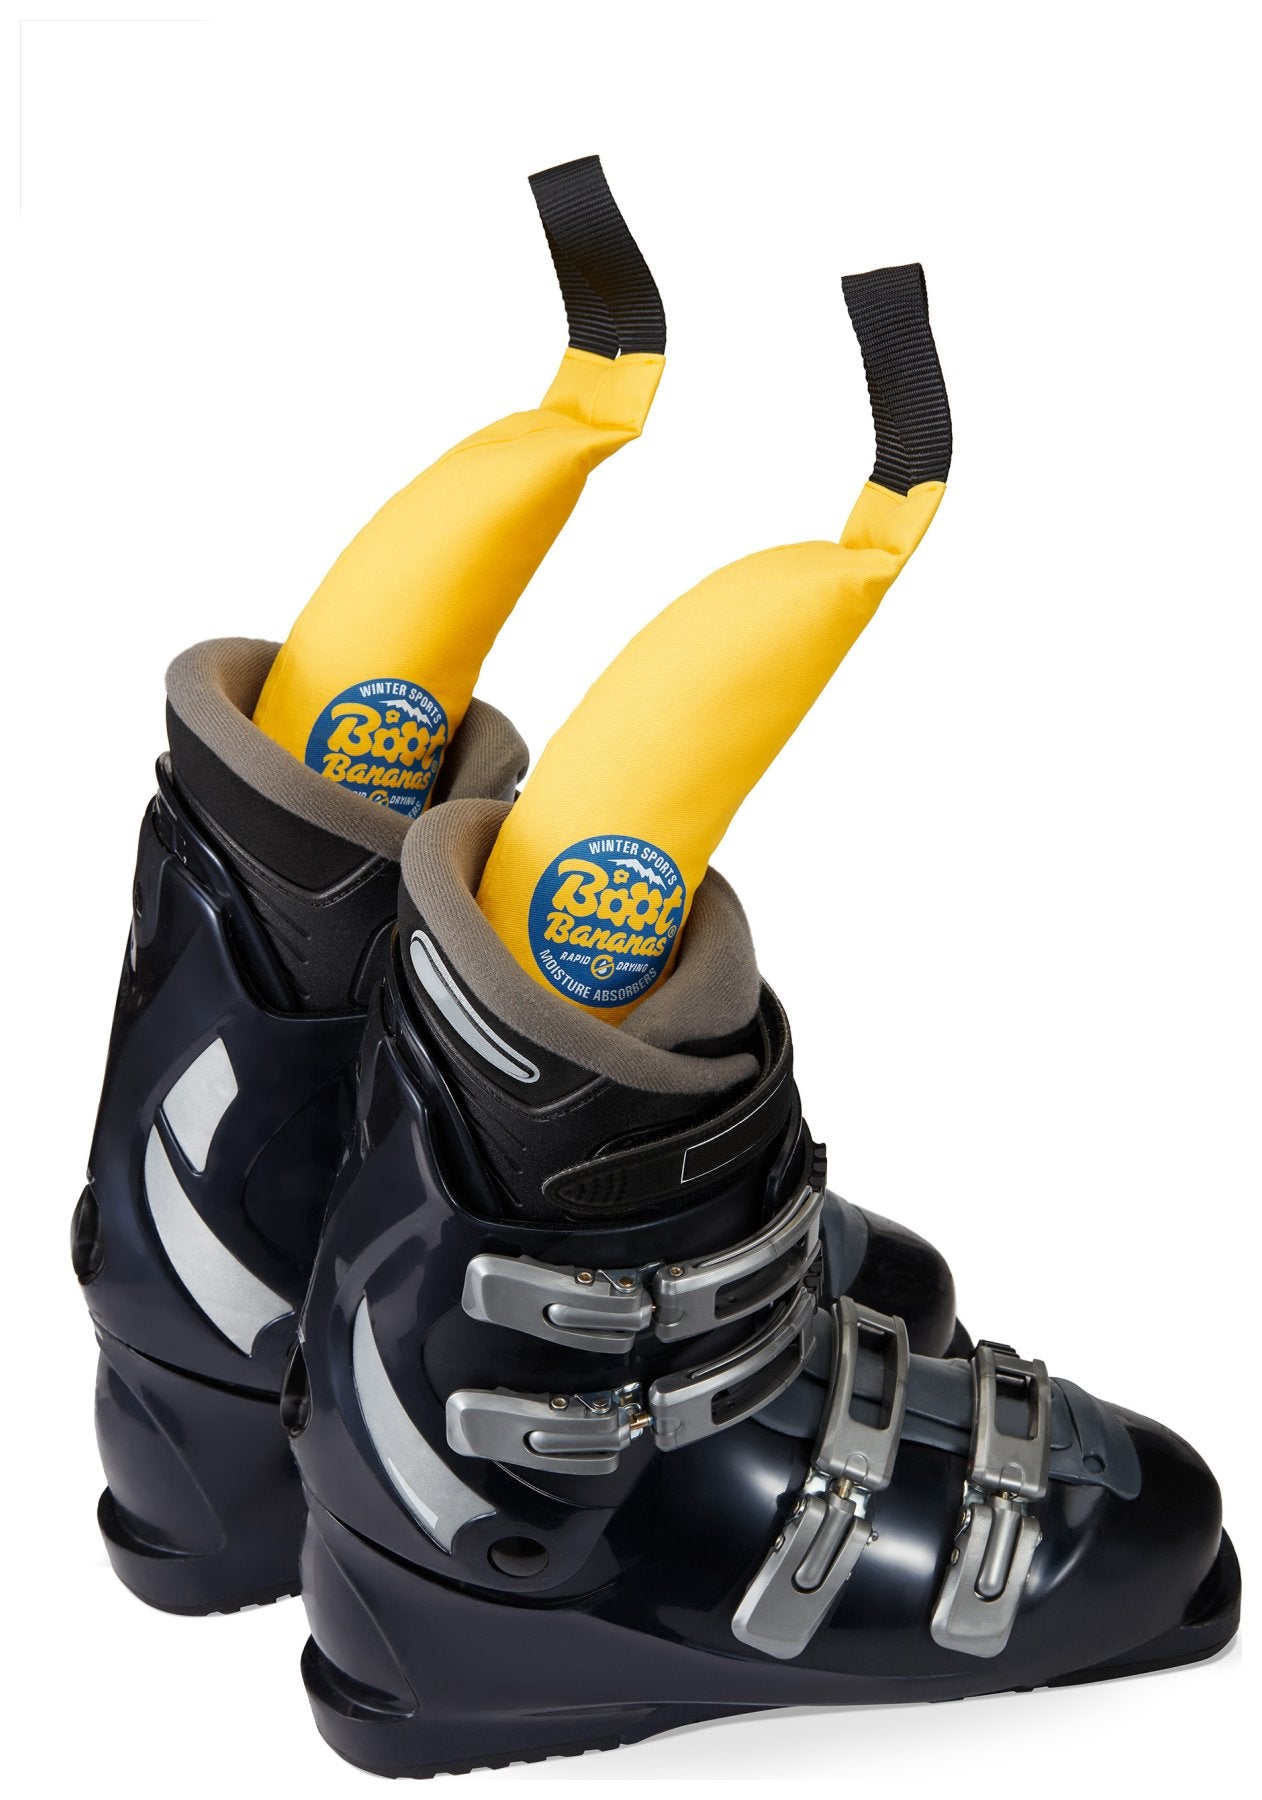 Winter Sports Boot Bananas, absorbeur d'humidité chaussures